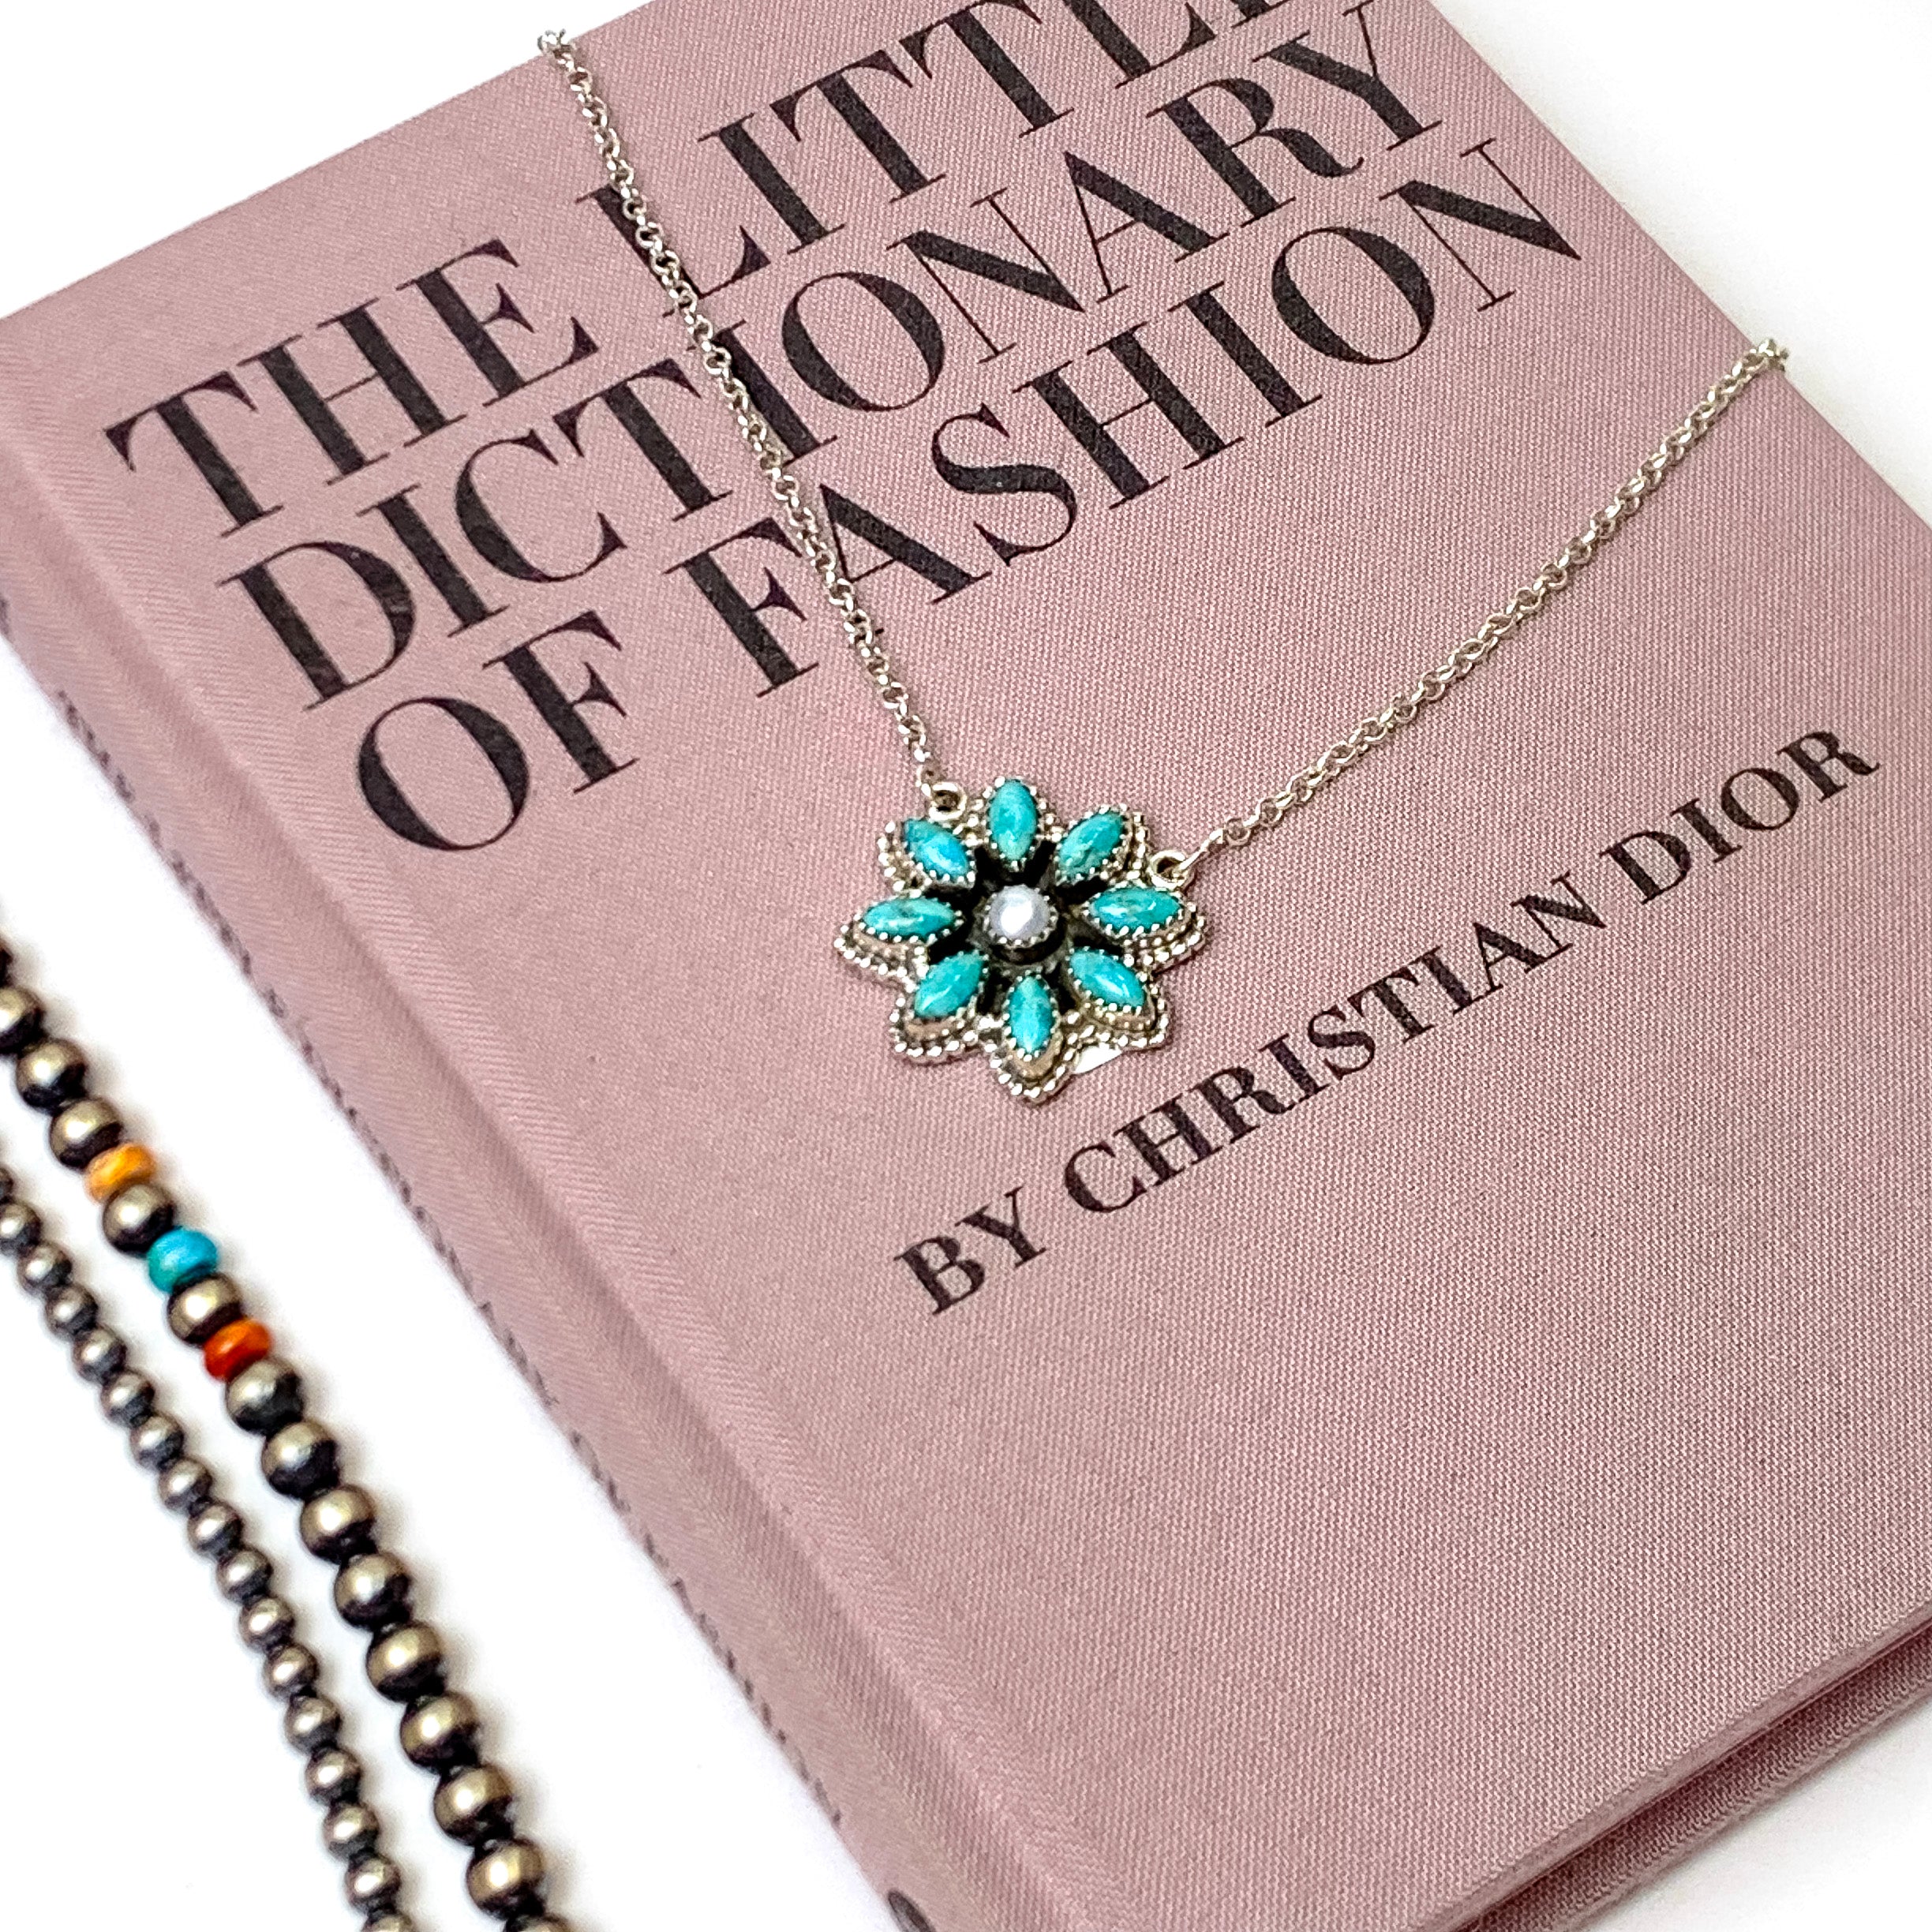 Hada Collection | Handmade Sterling Silver Chain Necklace with Kingman Turquoise Flower Cluster Pendant - Giddy Up Glamour Boutique